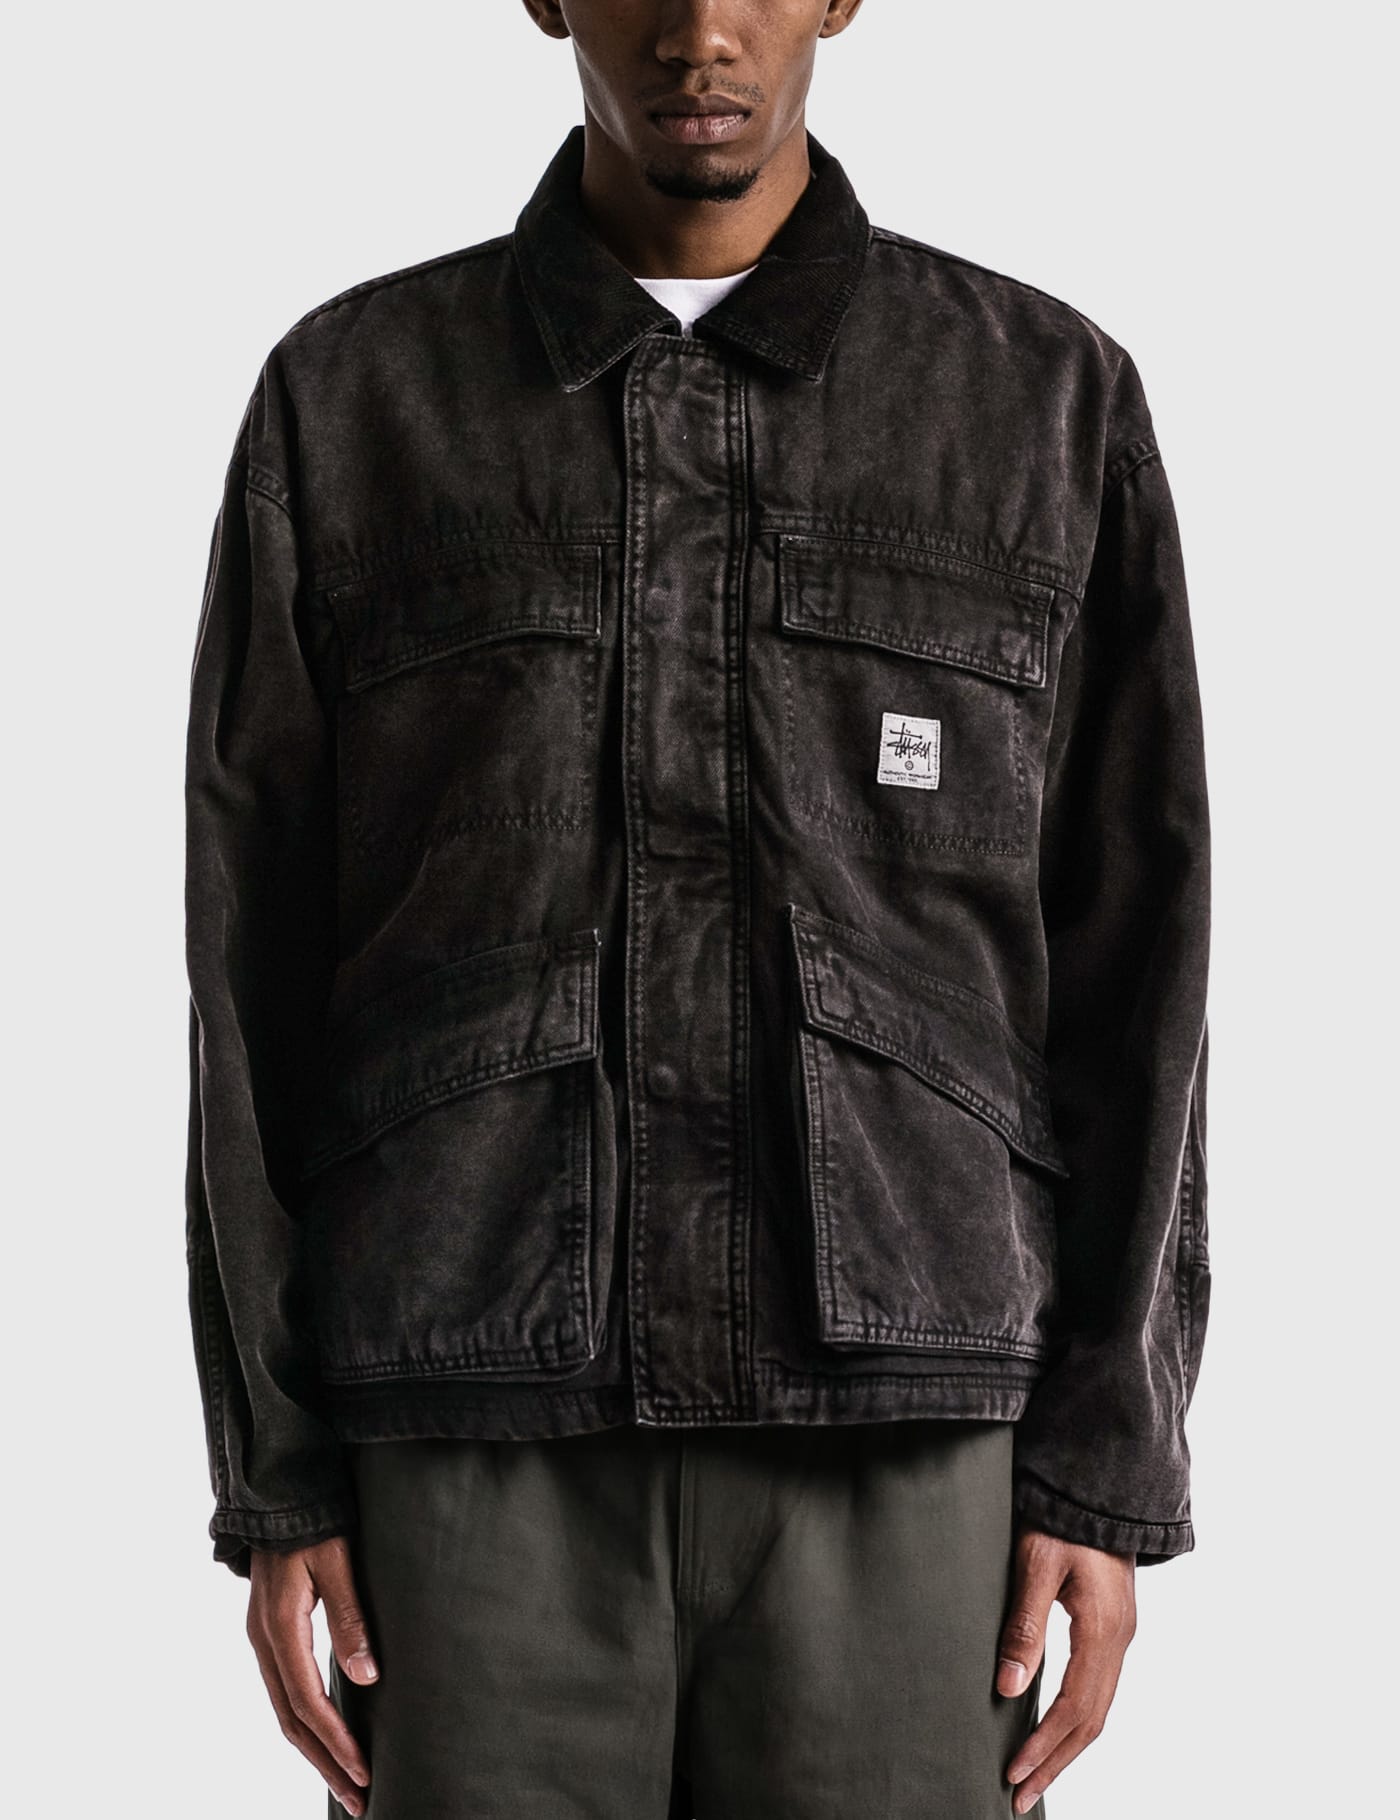 Stüssy - Washed Canvas Shop Jacket | HBX - Globally Curated